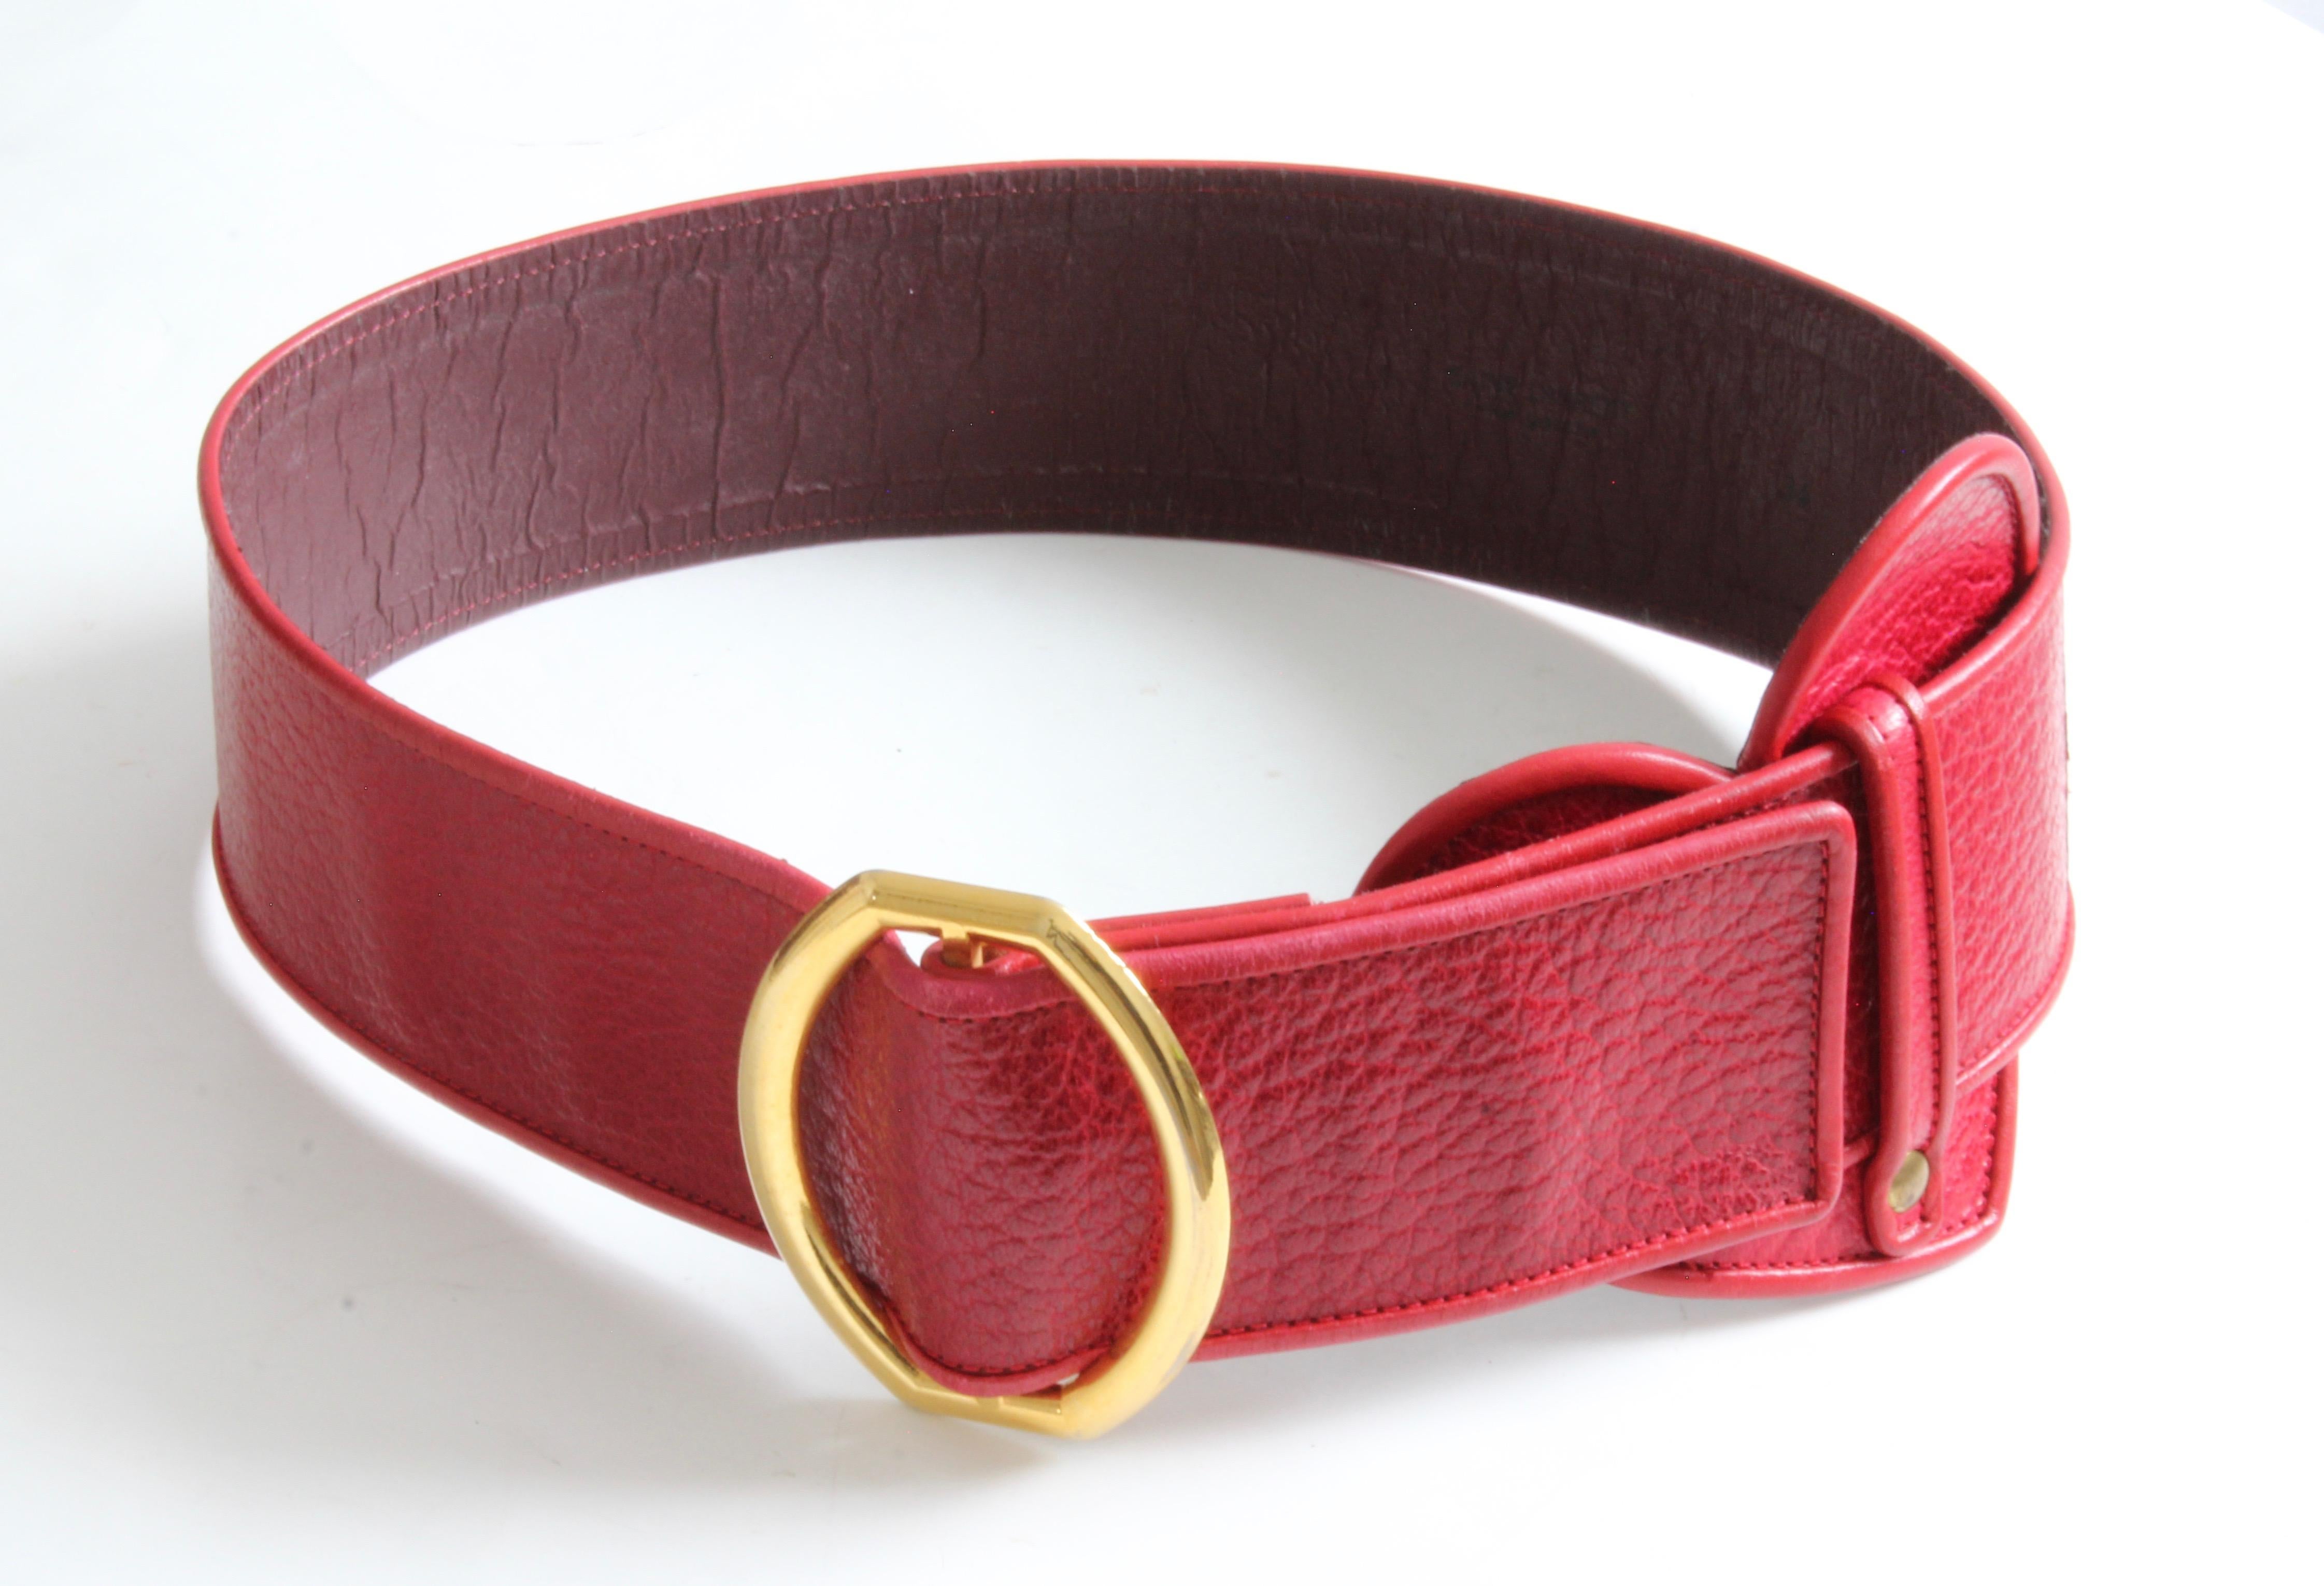 Yves Saint Laurent Wide Belt YSL Rive Gauche Red Leather Heart Vintage 70s Rare For Sale 3